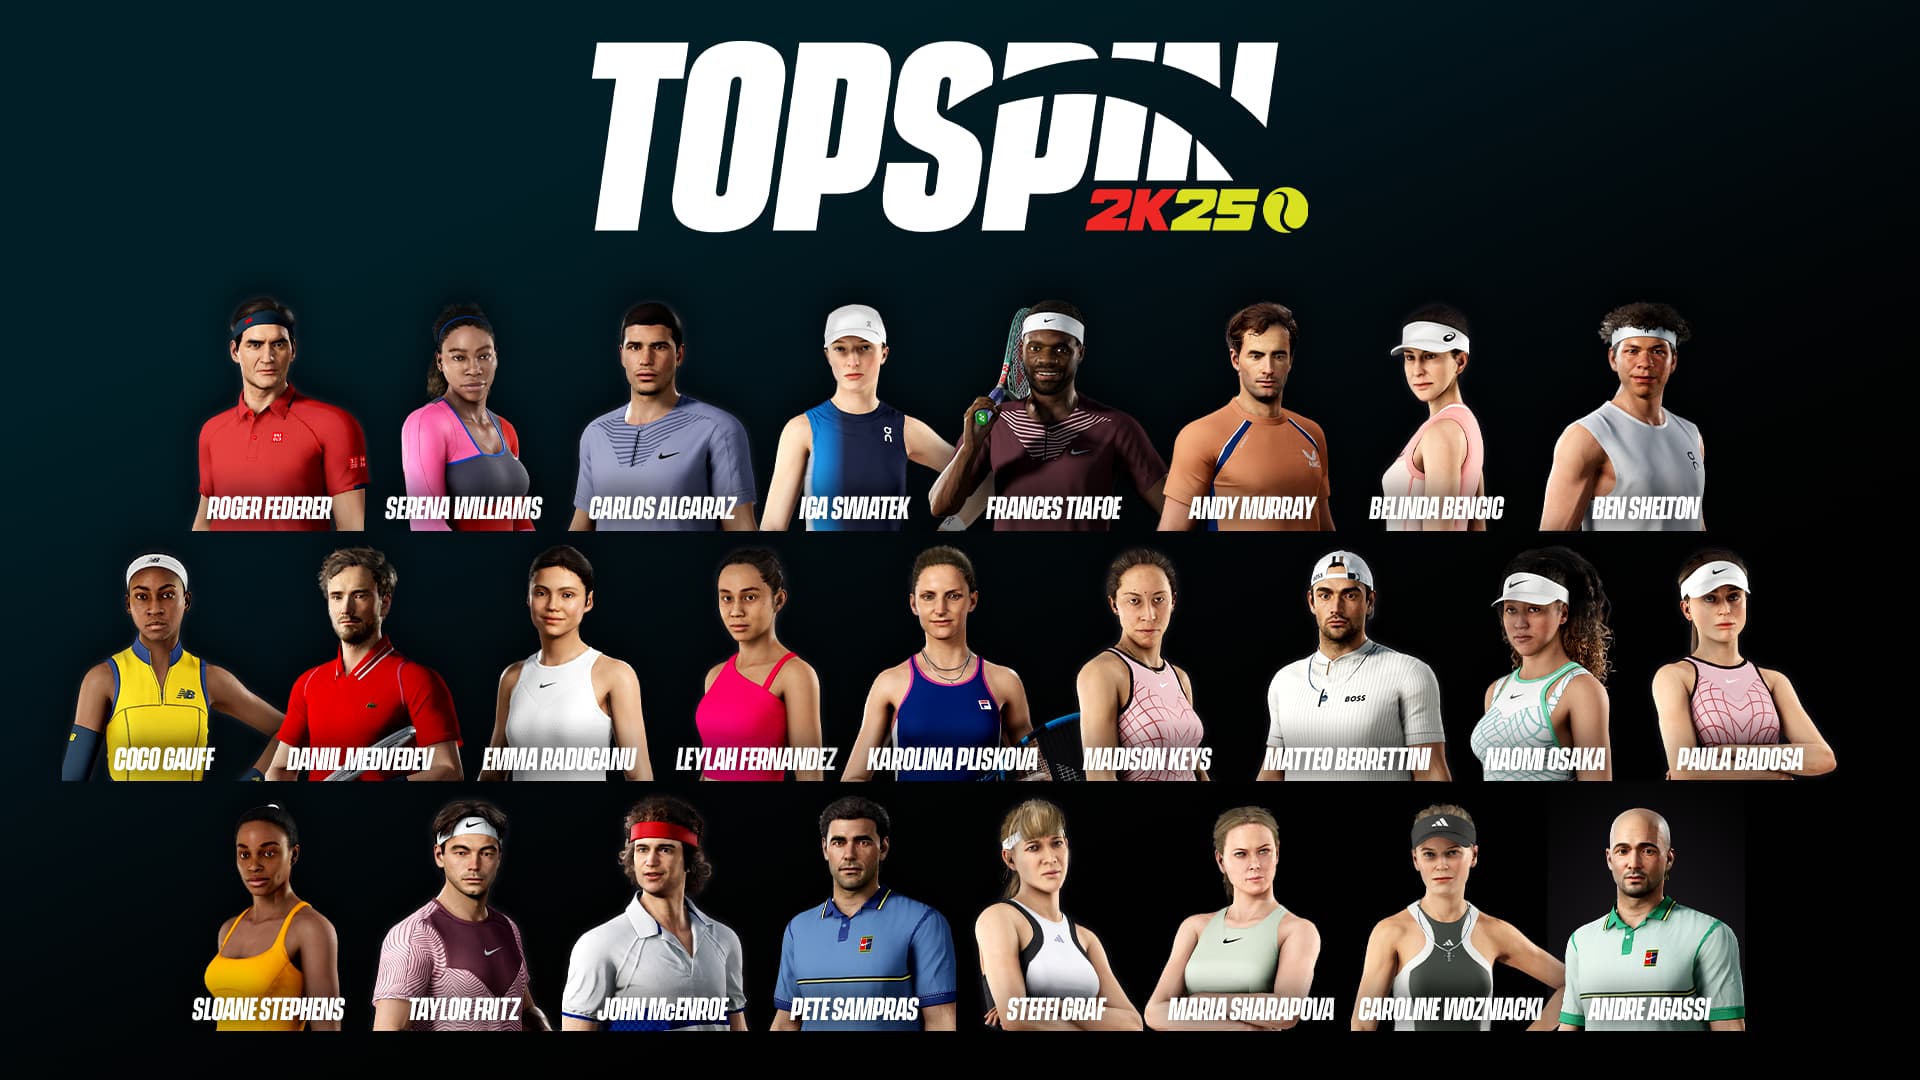 TOPSPIN 2K25 PLAYABLE PROS